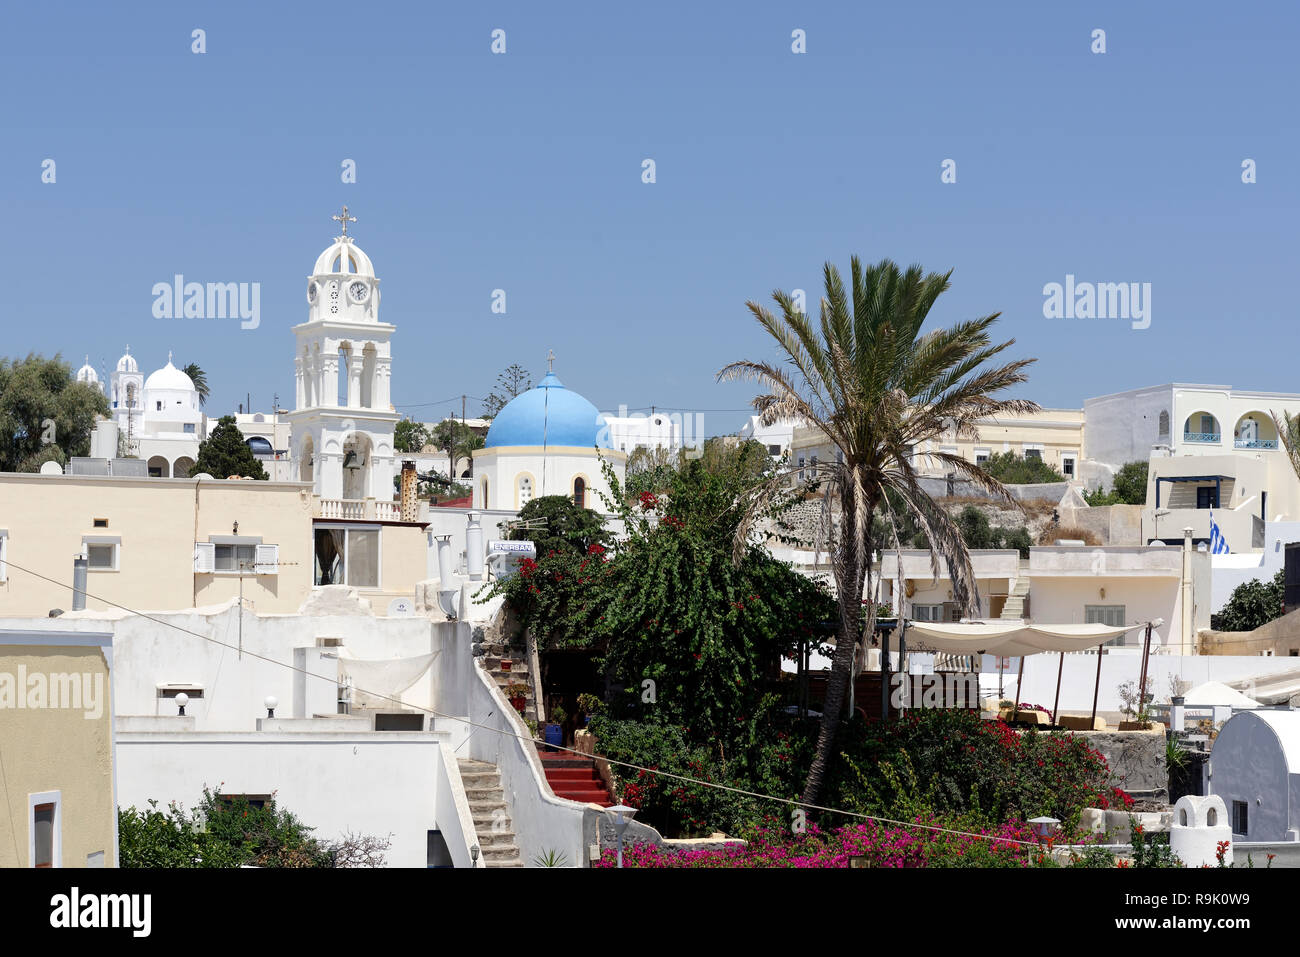 Church domes and belltowers and whitewashed buildings dominate the skyline of the village of Megalochori, Santorini, Greece. Stock Photo